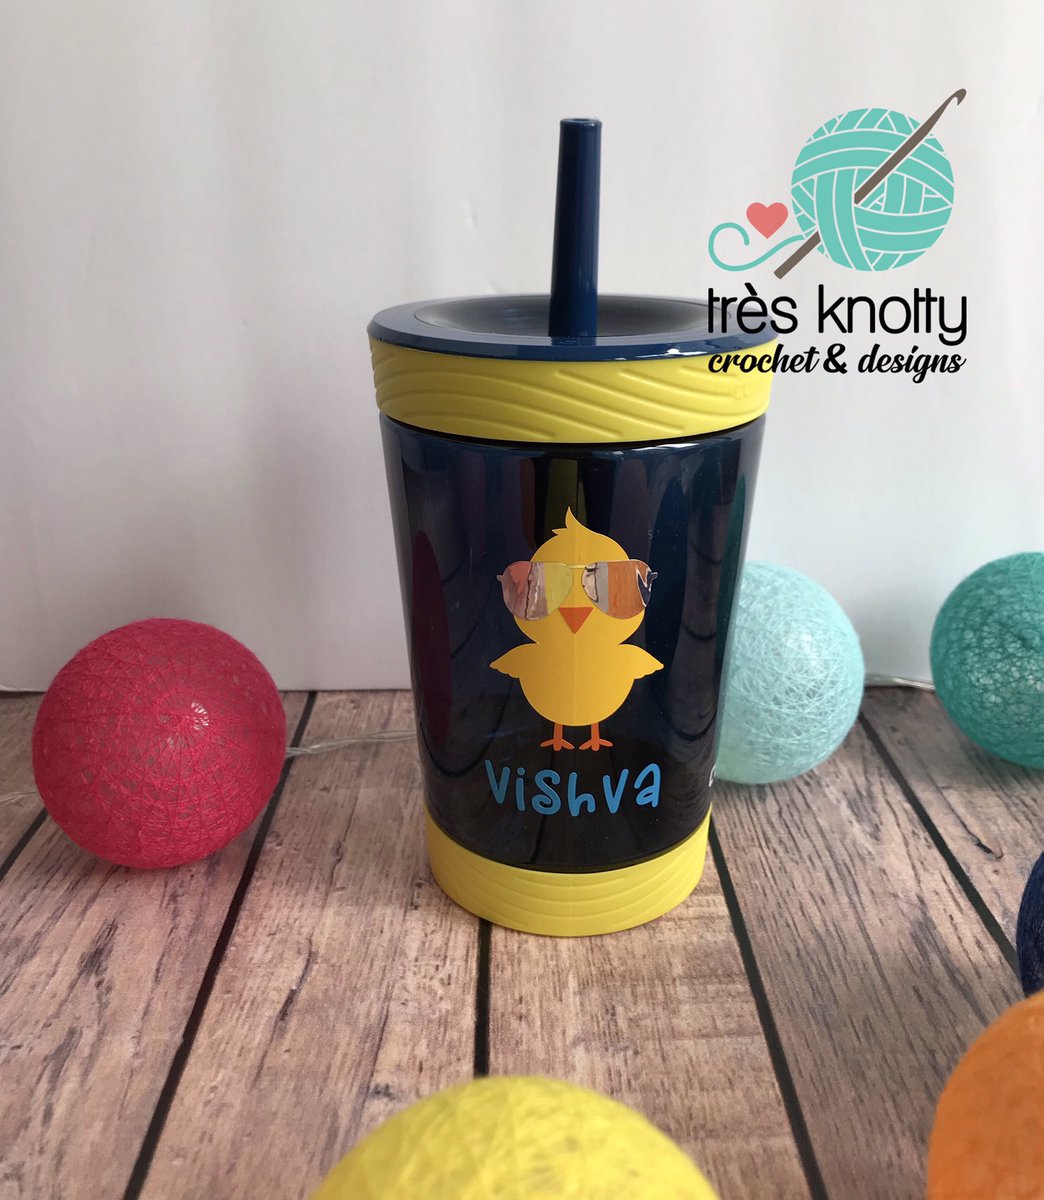 The sunglasses are EVERYTHING. These no-spill, leak-proof, #personalizedcups are perfect for Easter baskets or party favors! Head over to see all the colors it comes in. etsy.com/shop/tresknotty #eastergifts #partyfavors #waterbottles #personalizedgifts #tresknotty